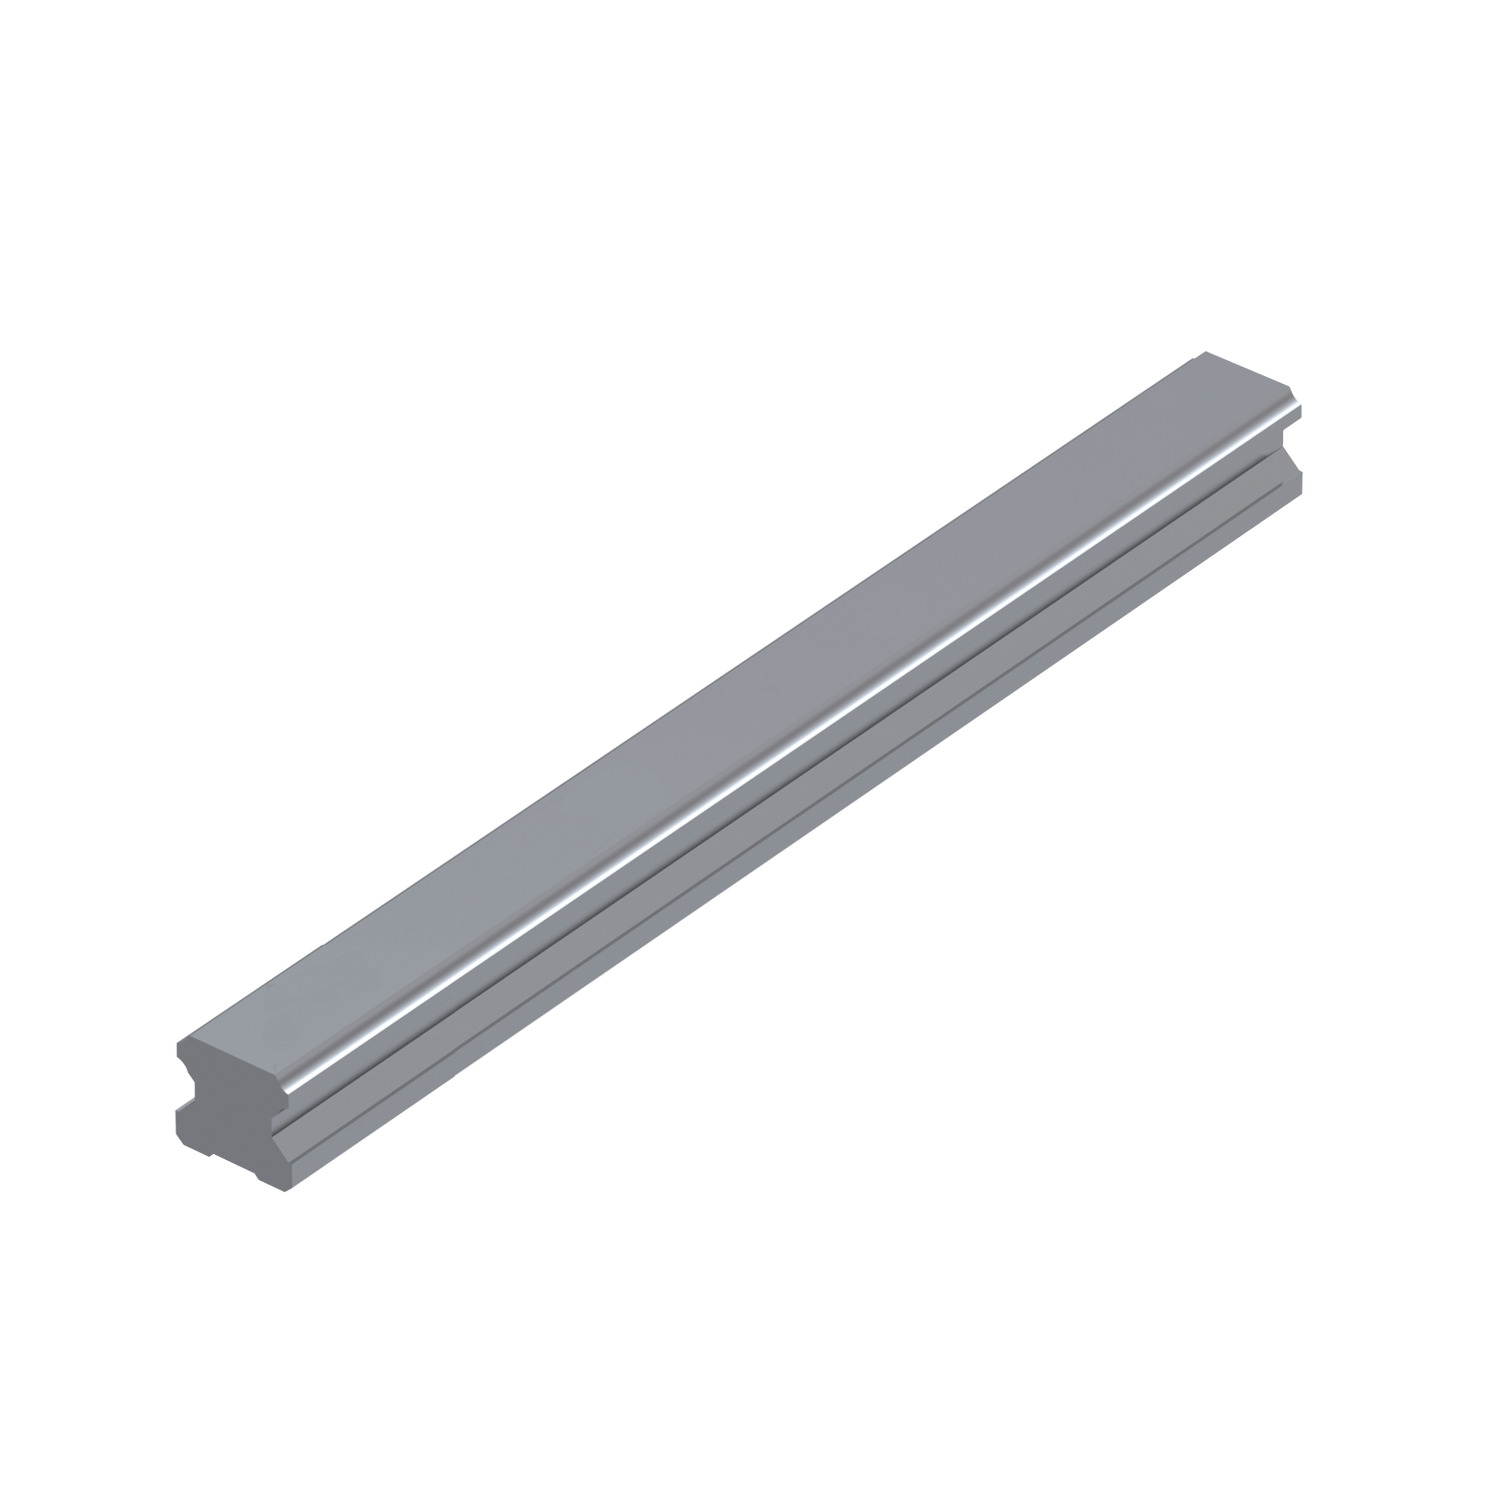 L1016.RF30-3000 Linear guide rail rear fixing 30mm 3000 Hardened and ground steel. EC:20168322 WG:05063055296977